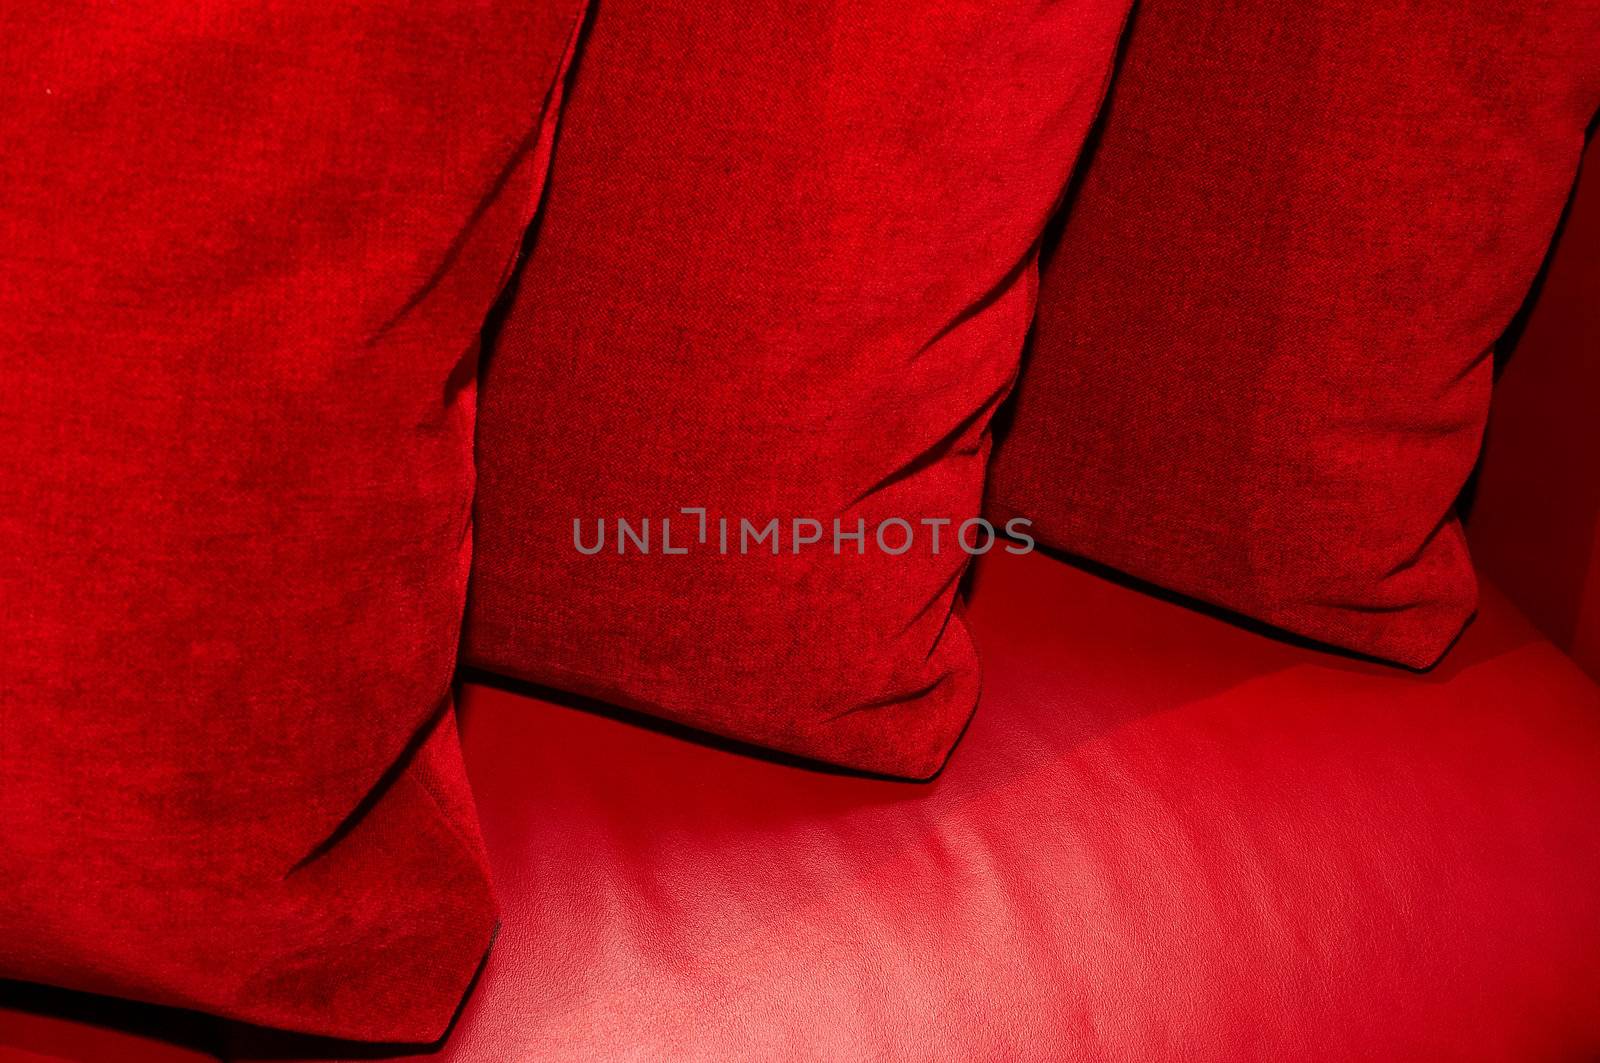 Three red pillows on a leather sofa